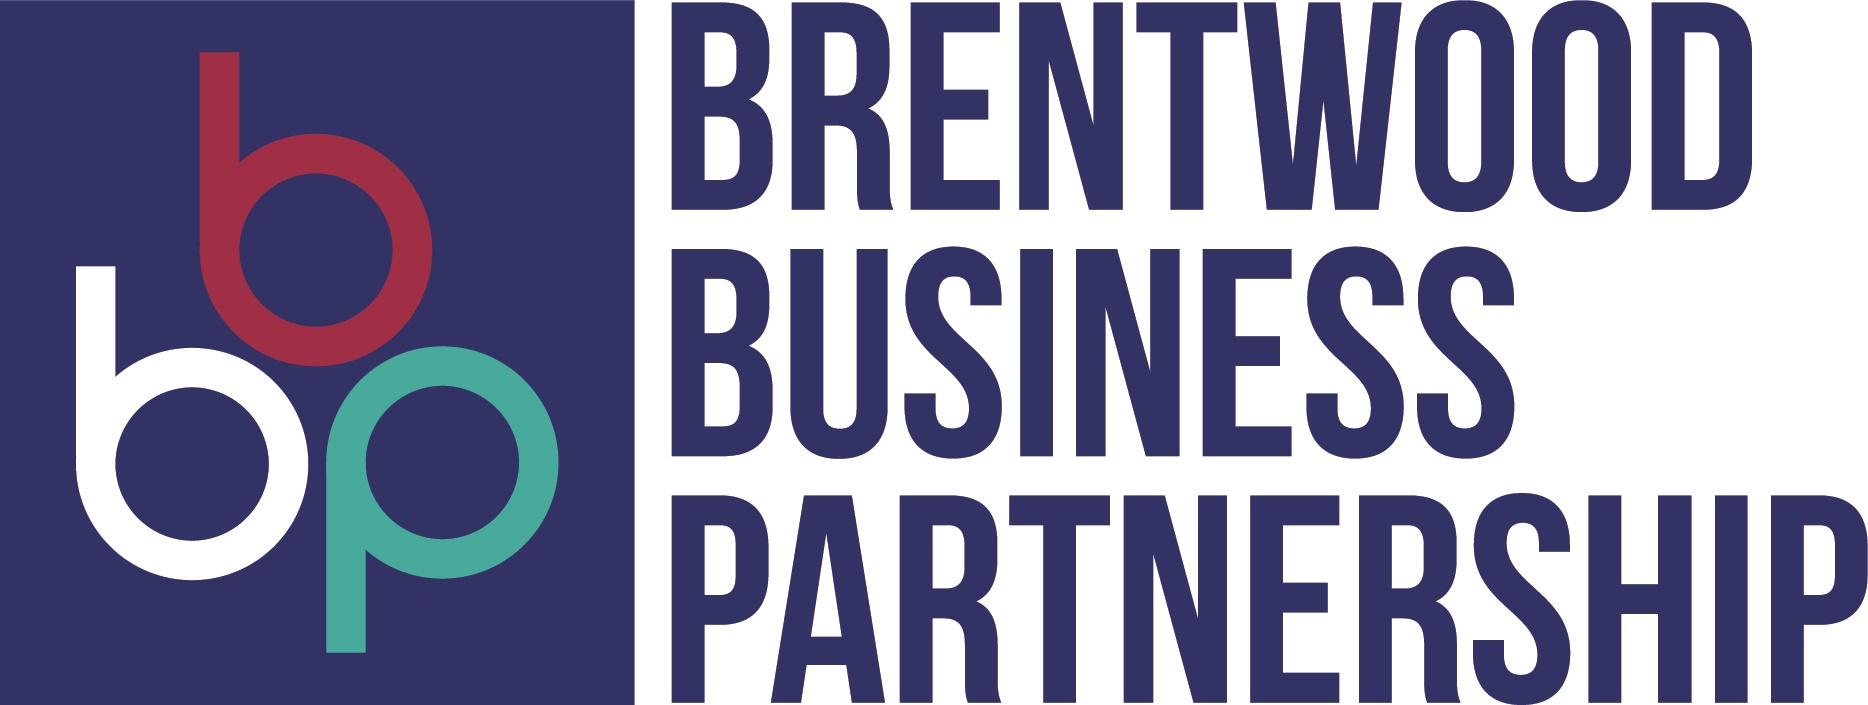 Logo for Brentwood Business Partnership